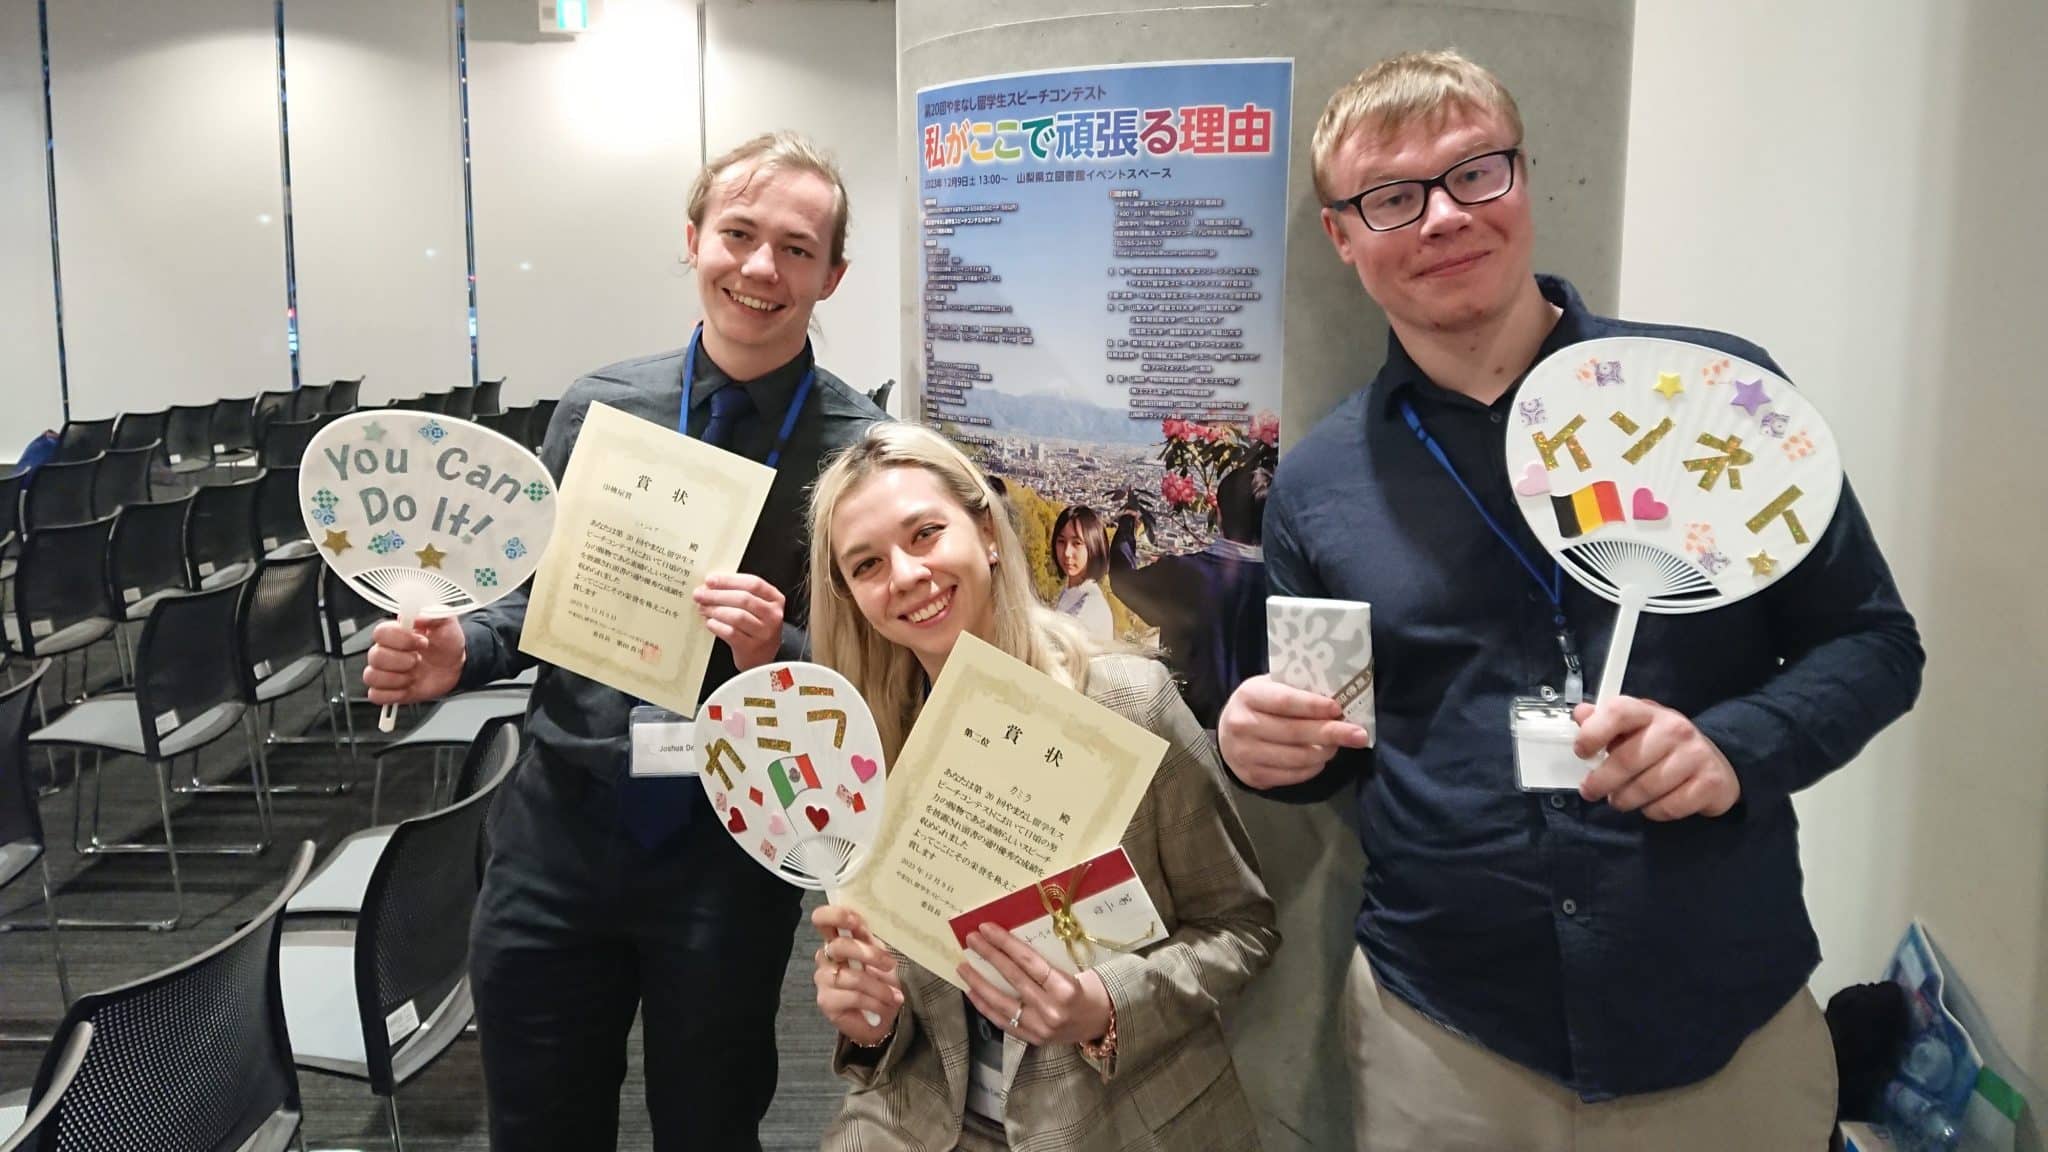 iCLA students join and win awards in Yamanashi International Student Speech Contest